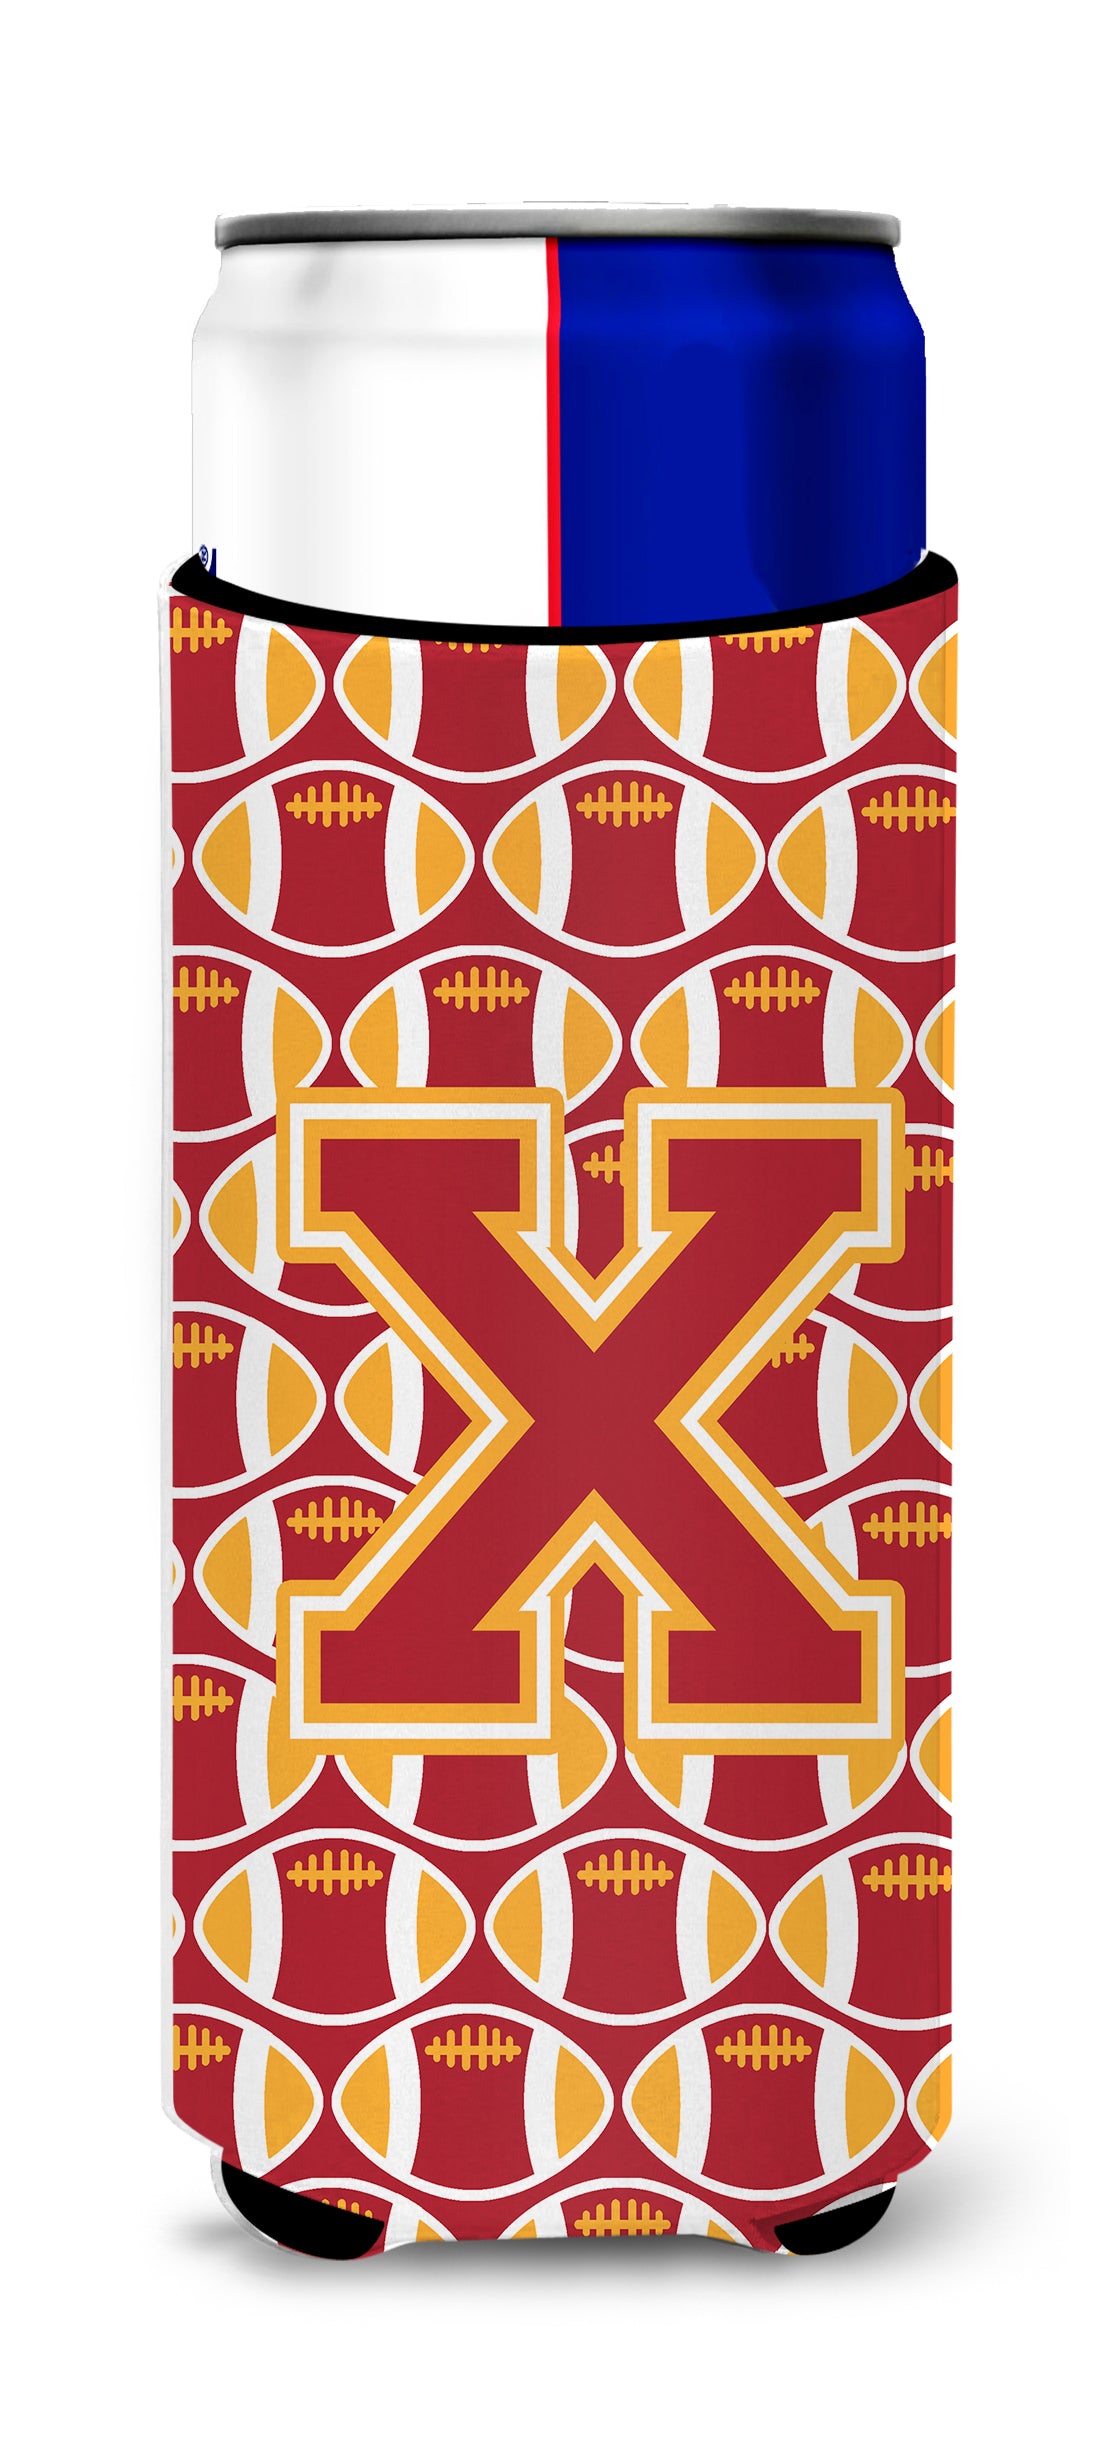 Letter X Football Cardinal and Gold Ultra Beverage Insulators for slim cans CJ1070-XMUK